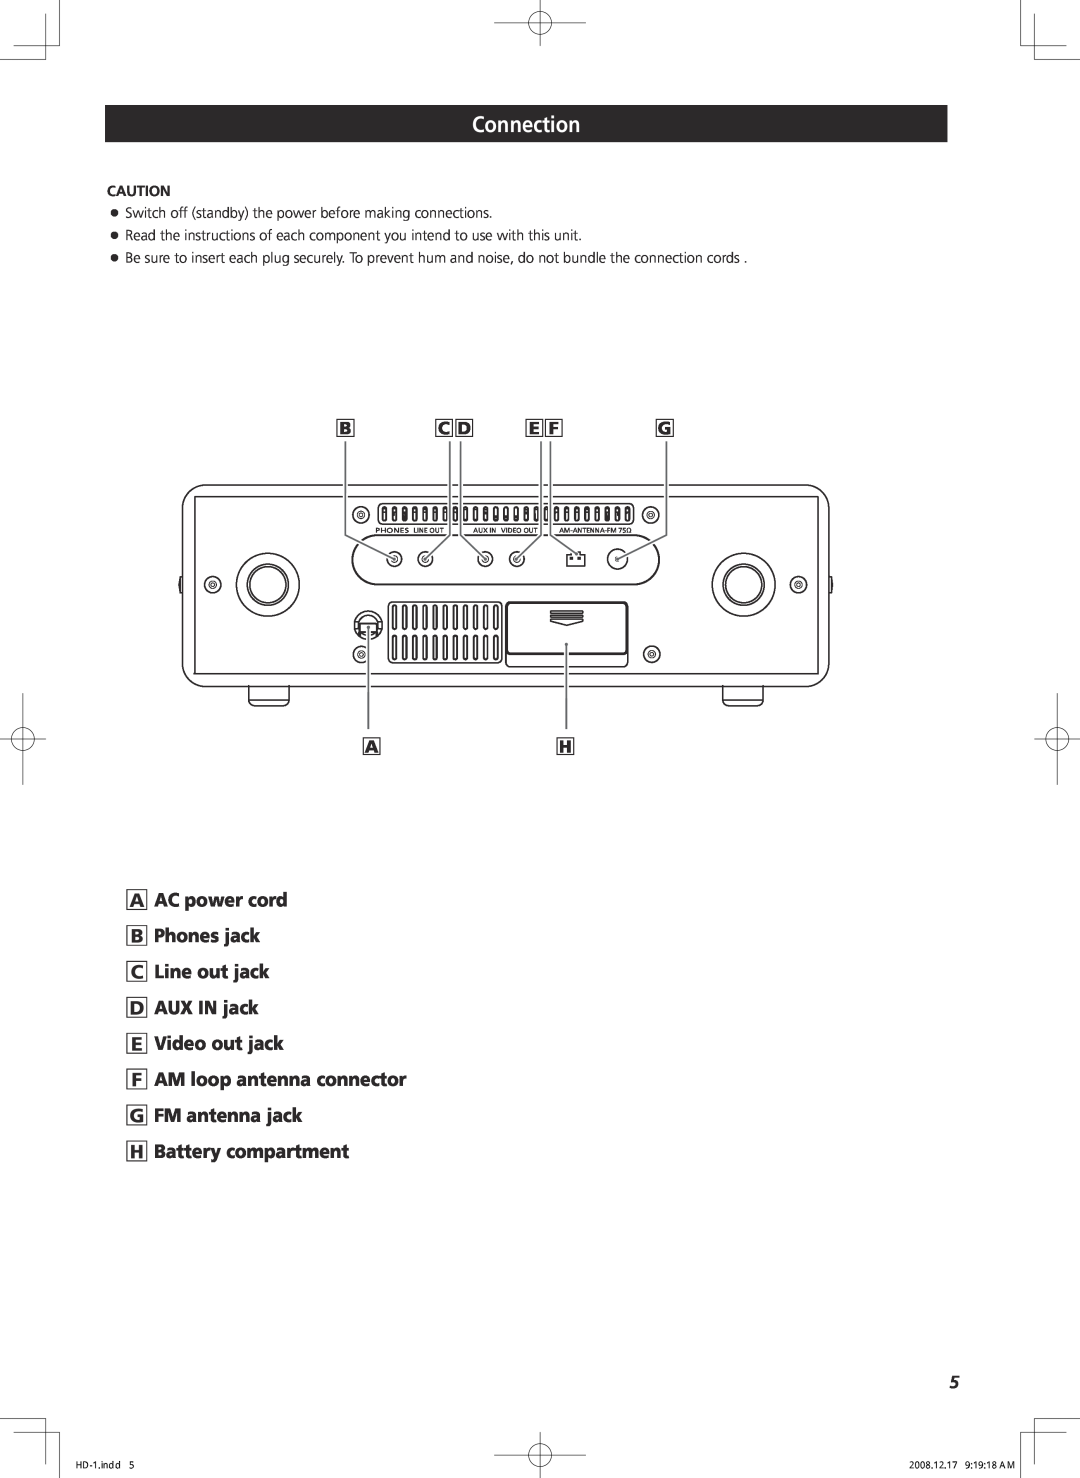 Teac HD-1 owner manual Connection, F AM loop antenna connector G FM antenna jack, H Battery compartment 